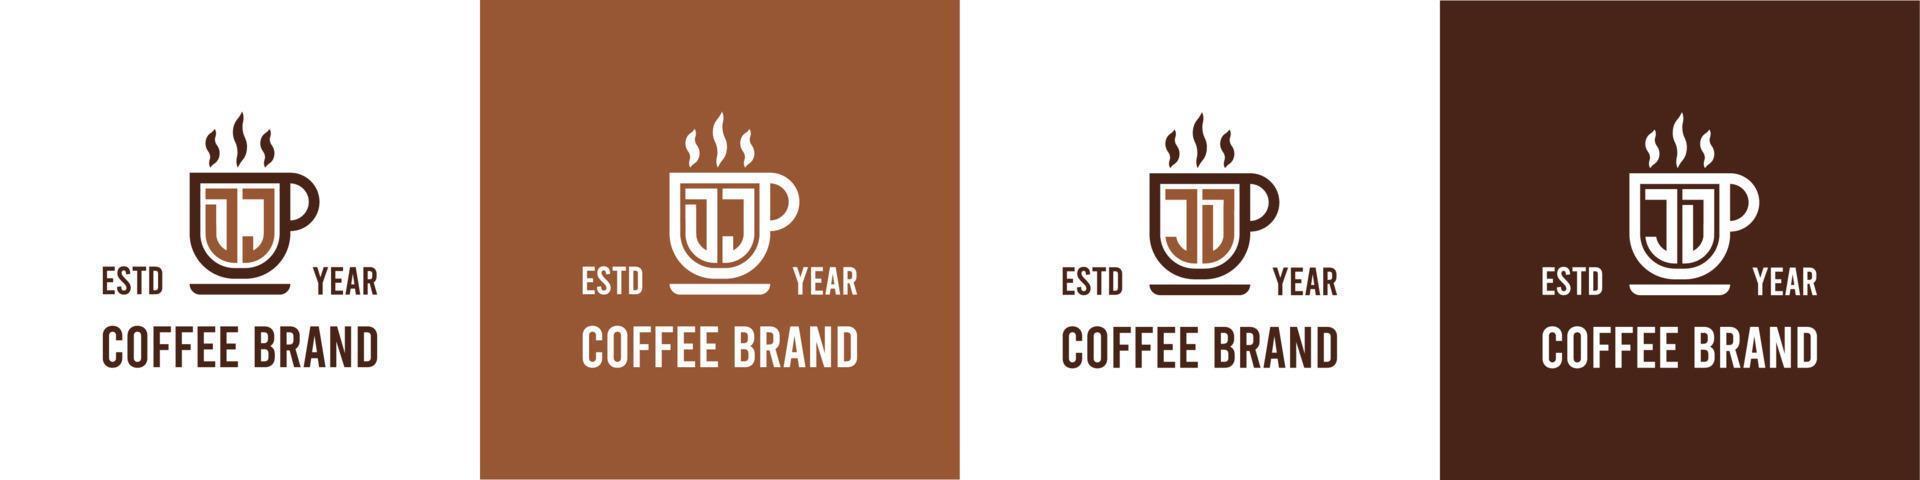 Letter DJ and JD Coffee Logo, suitable for any business related to Coffee, Tea, or Other with DJ or JD initials. vector